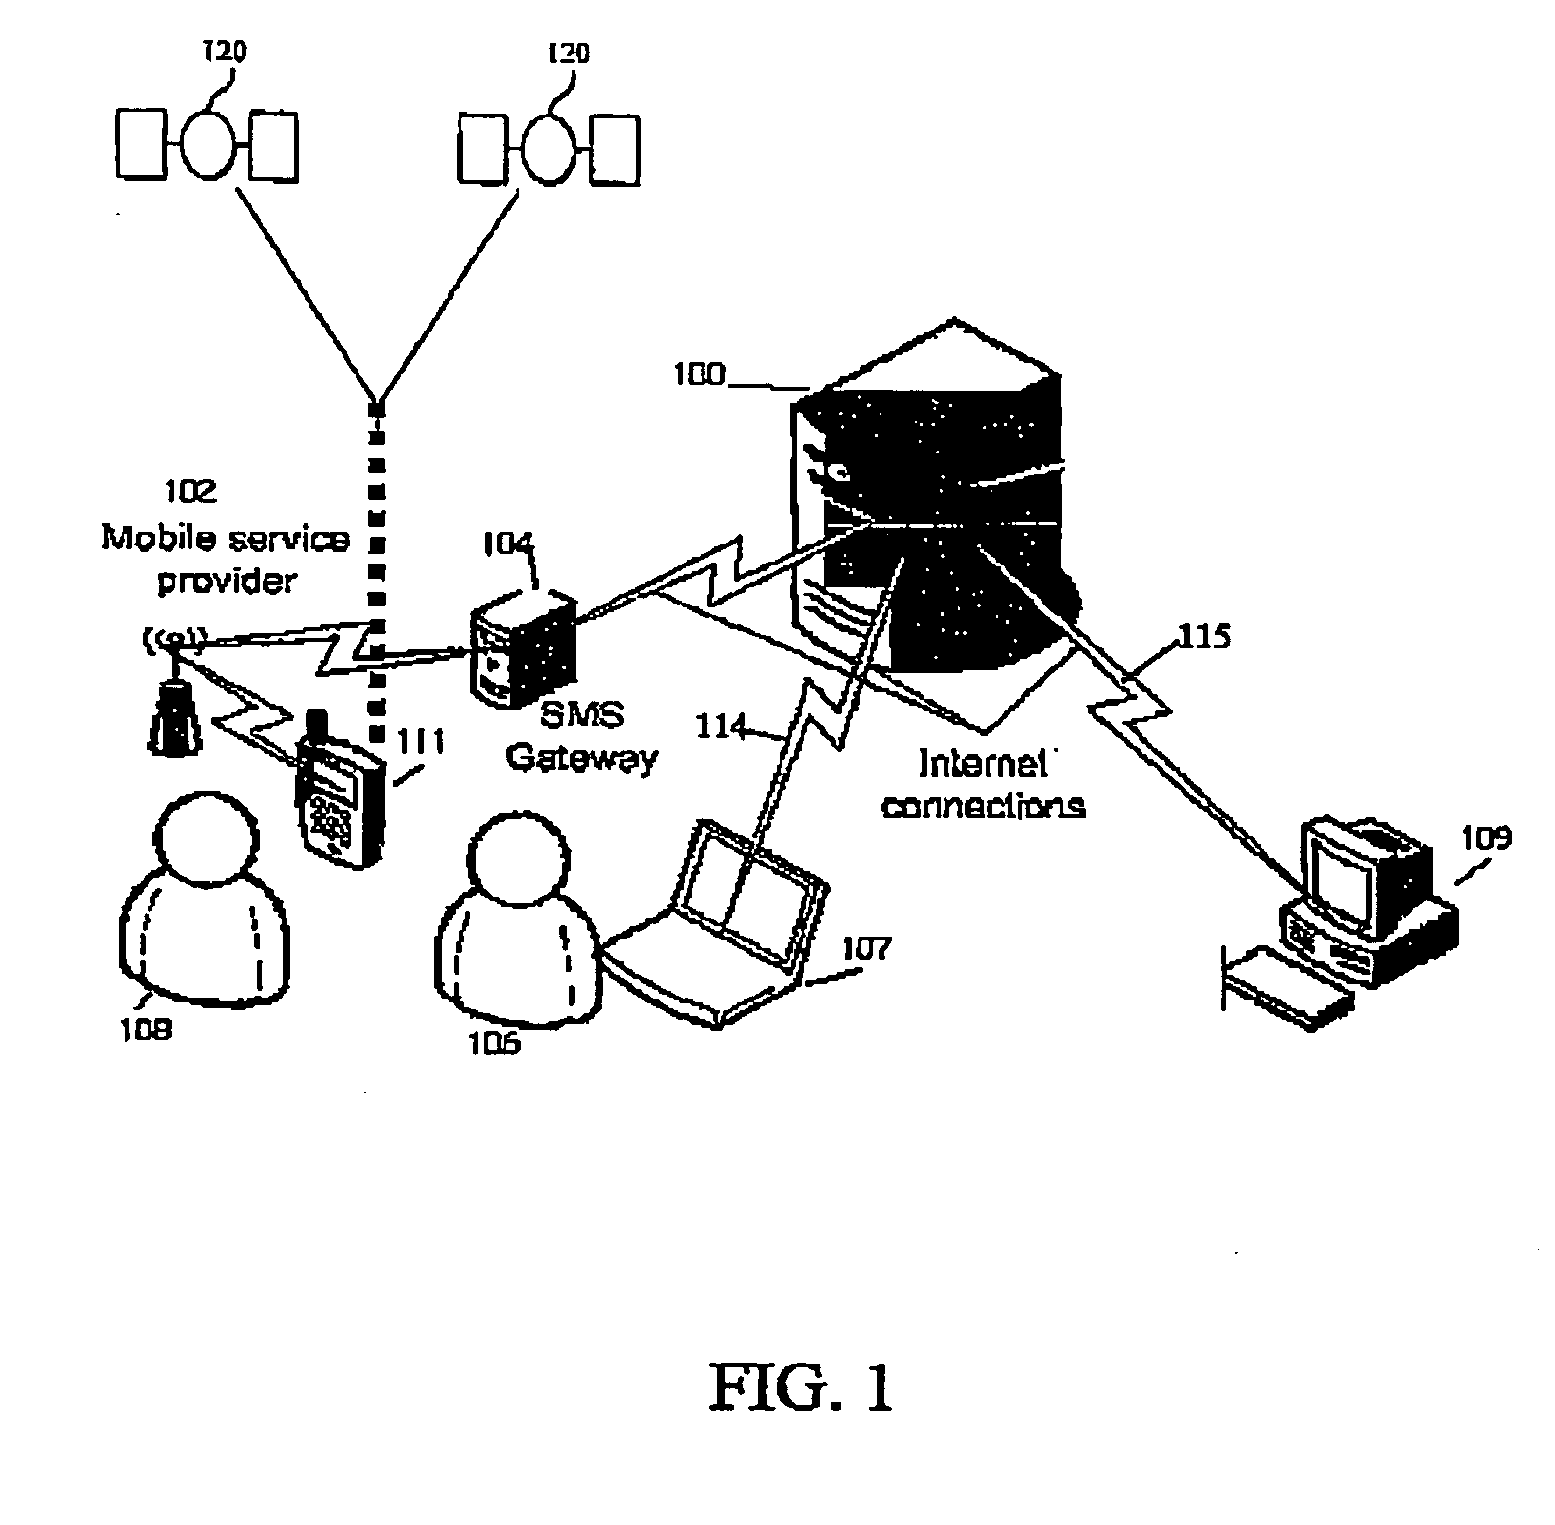 Location-based demographic profiling system and method of use